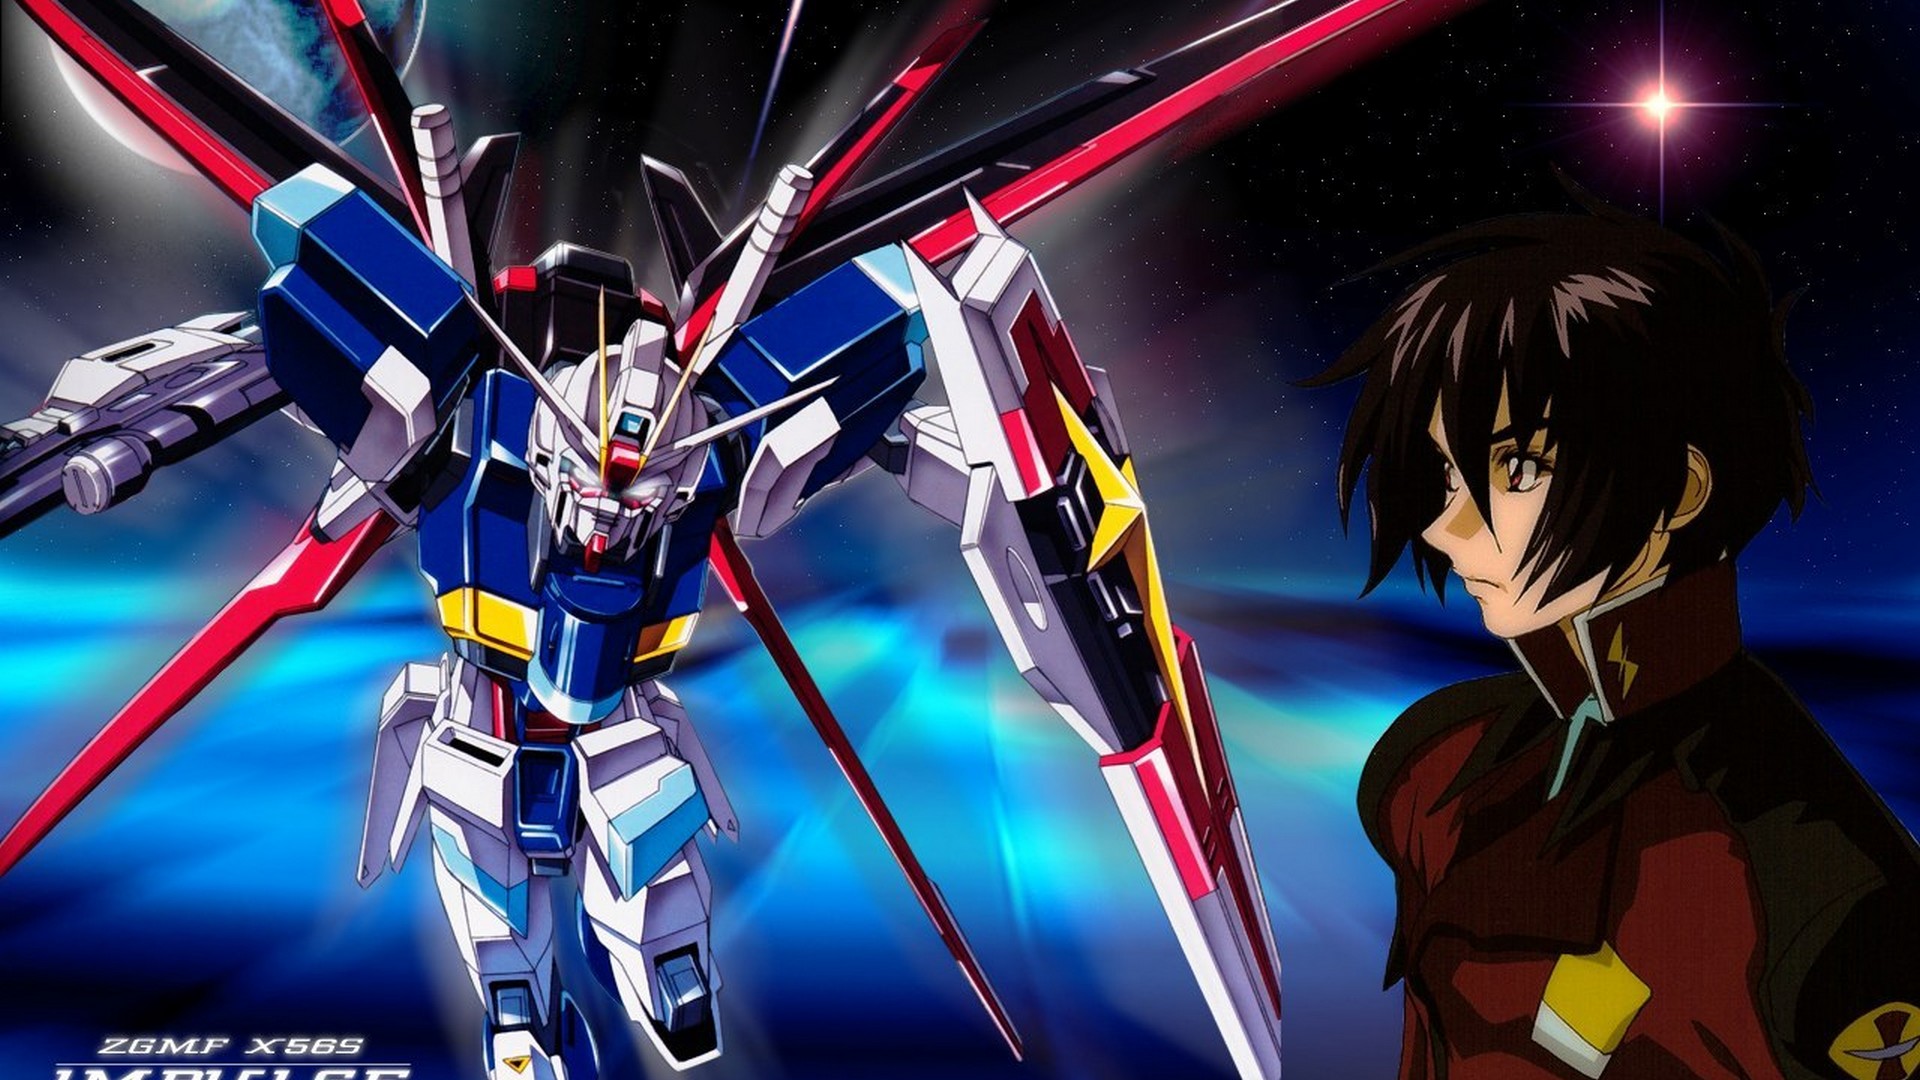 Gundam Wallpaper with high-resolution 1920x1080 pixel. You can use this poster wallpaper for your Desktop Computers, Mac Screensavers, Windows Backgrounds, iPhone Wallpapers, Tablet or Android Lock screen and another Mobile device